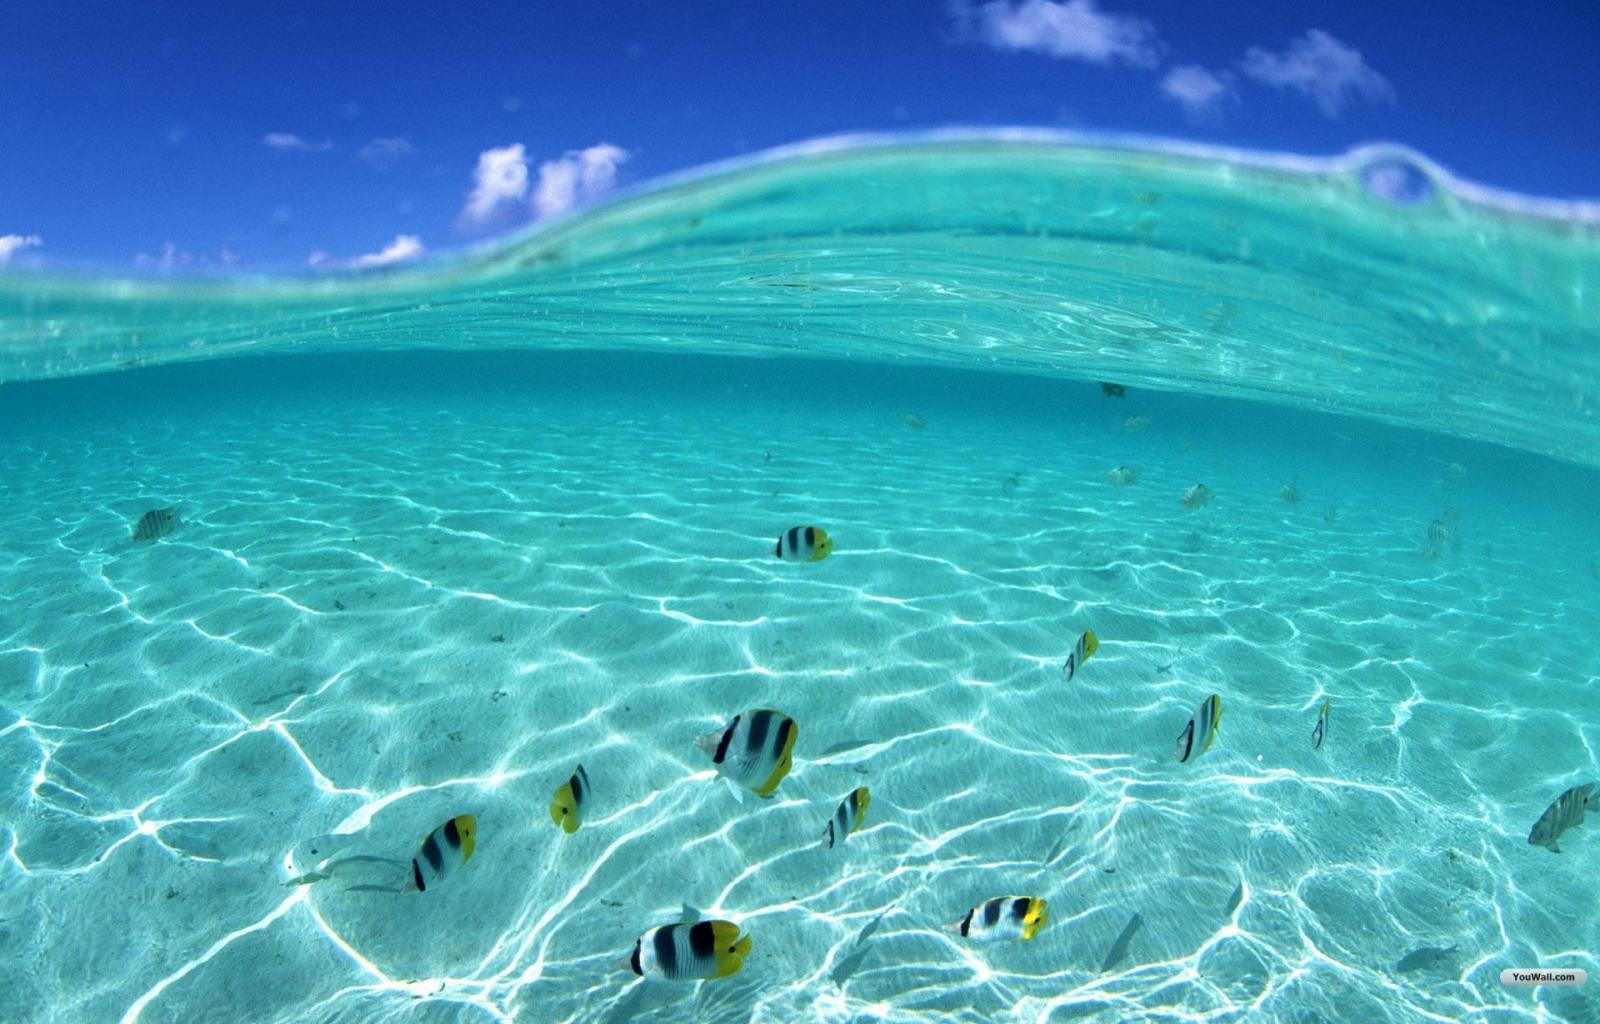 YouWall - Under the Sea Wallpaper - wallpaper,wallpapers,free